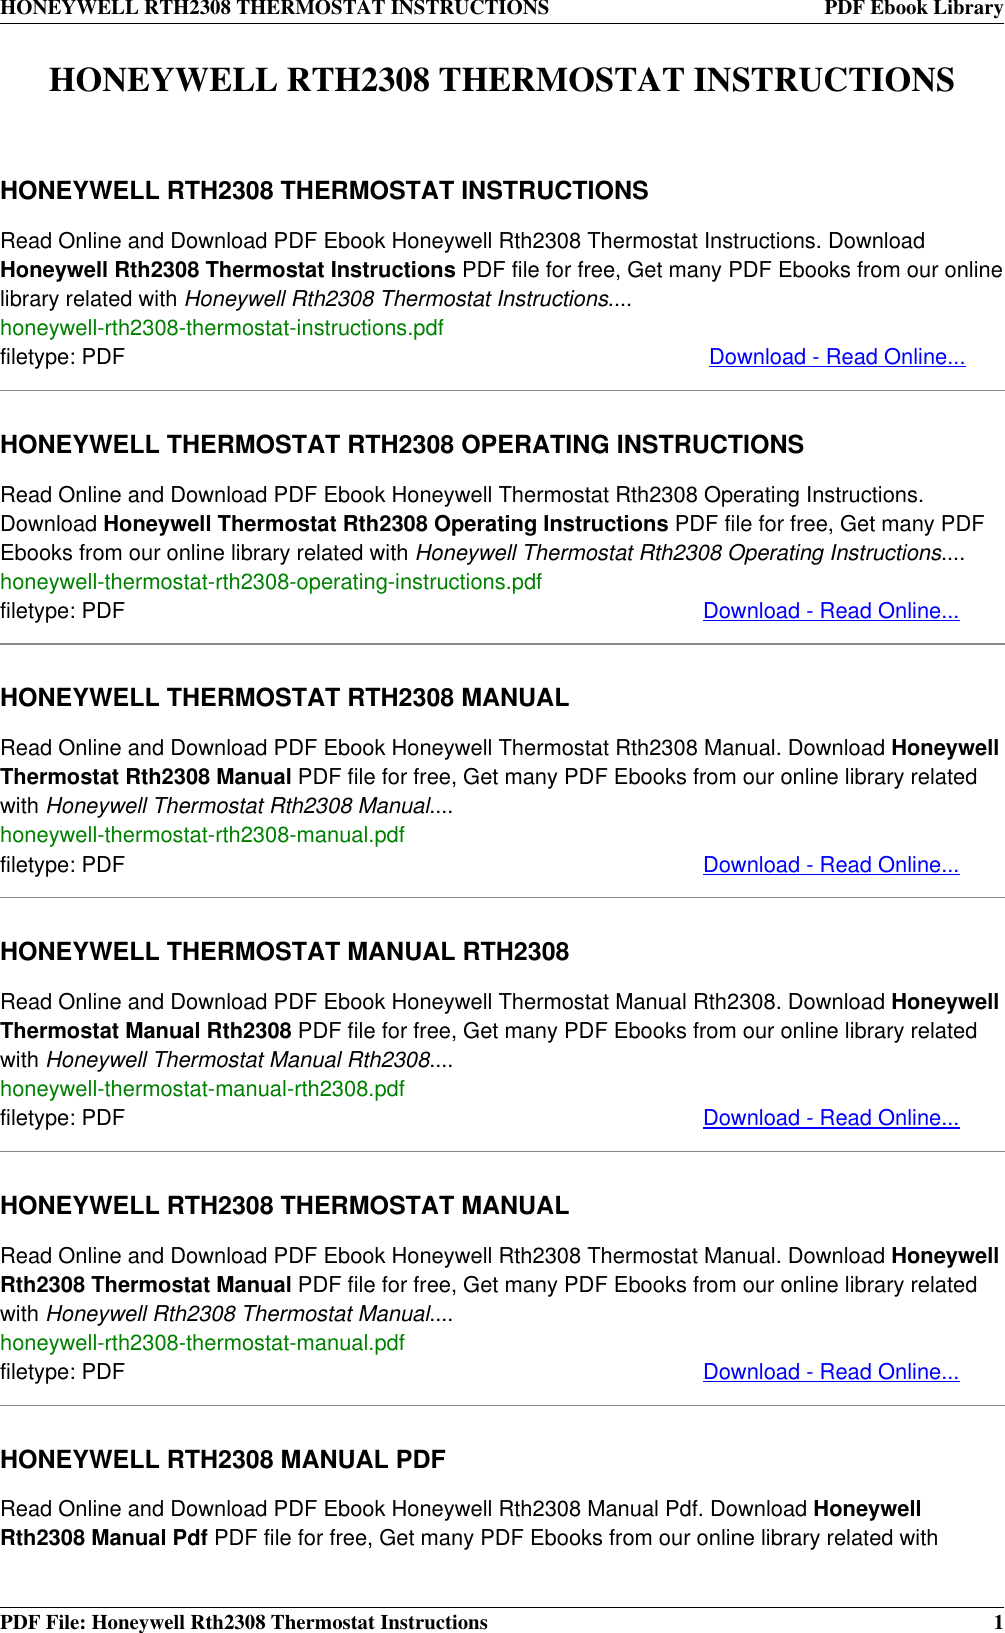 Page 1 of 4 - Honeywell Honeywell-Honeywell-Thermostat-Rth2308-Users-Manual- RTH2308 THERMOSTAT INSTRUCTIONS  Honeywell-honeywell-thermostat-rth2308-users-manual